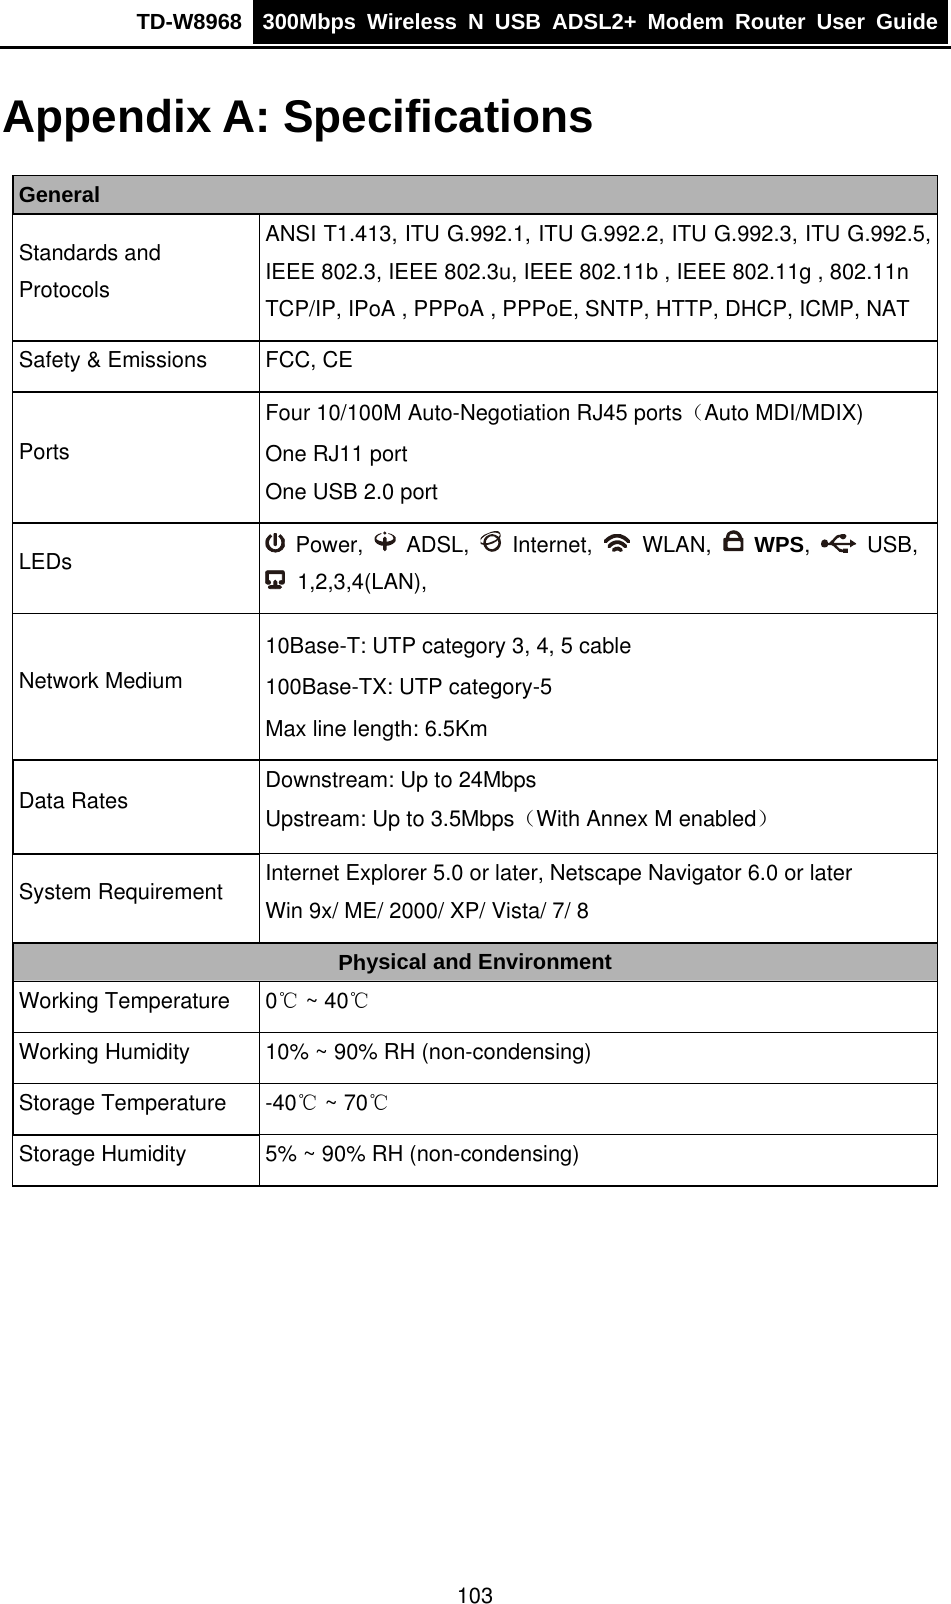 TD-W8968  300Mbps Wireless N USB ADSL2+ Modem Router User Guide  Appendix A: Specifications General Standards and   Protocols ANSI T1.413, ITU G.992.1, ITU G.992.2, ITU G.992.3, ITU G.992.5, IEEE 802.3, IEEE 802.3u, IEEE 802.11b , IEEE 802.11g , 802.11n TCP/IP, IPoA , PPPoA , PPPoE, SNTP, HTTP, DHCP, ICMP, NAT Safety &amp; Emissions  FCC, CE Ports Four 10/100M Auto-Negotiation RJ45 ports（Auto MDI/MDIX) One RJ11 port One USB 2.0 port LEDs   Power,   ADSL,   Internet,   WLAN,   WPS,   USB,  1,2,3,4(LAN), Network Medium 10Base-T: UTP category 3, 4, 5 cable 100Base-TX: UTP category-5 Max line length: 6.5Km Data Rates  Downstream: Up to 24Mbps Upstream: Up to 3.5Mbps（With Annex M enabled） System Requirement  Internet Explorer 5.0 or later, Netscape Navigator 6.0 or later Win 9x/ ME/ 2000/ XP/ Vista/ 7/ 8 Physical and Environment Working Temperature  0  ~ 40℃℃ Working Humidity  10% ~ 90% RH (non-condensing) Storage Temperature  -40  ~ 70℃℃ Storage Humidity  5% ~ 90% RH (non-condensing)  103 